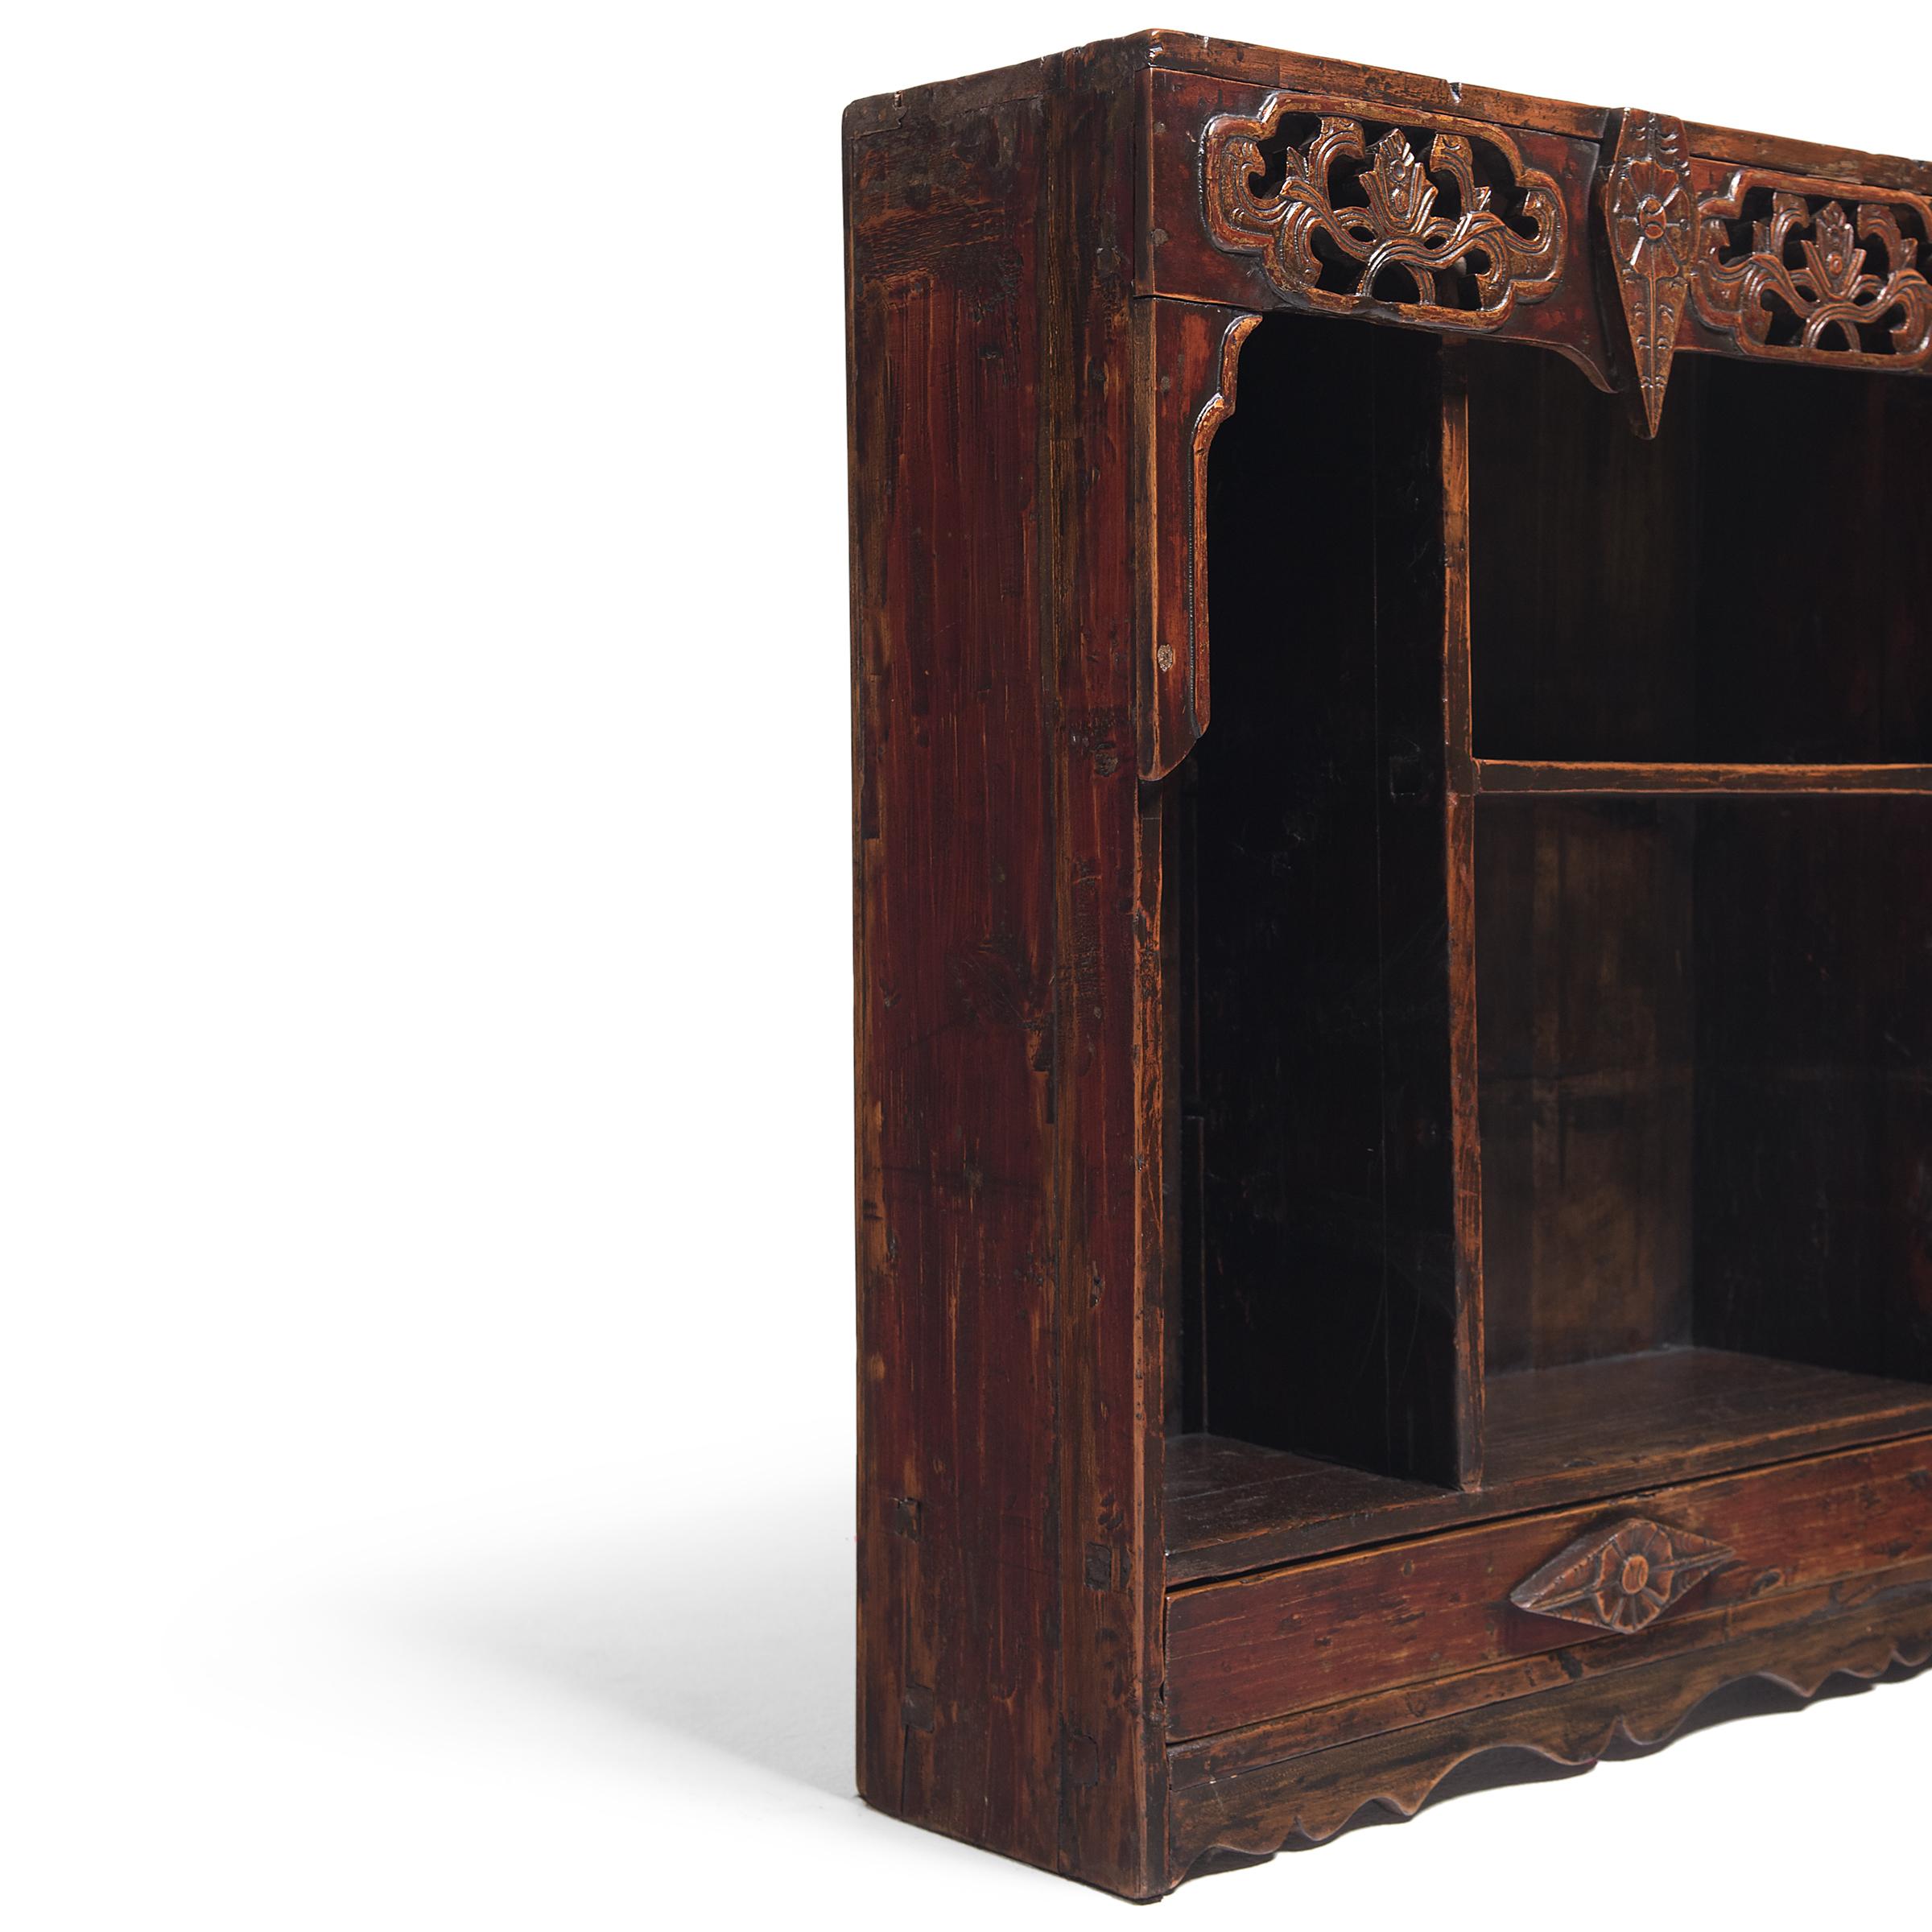 Provincial Chinese Collector's Shelf, c. 1900 For Sale 3